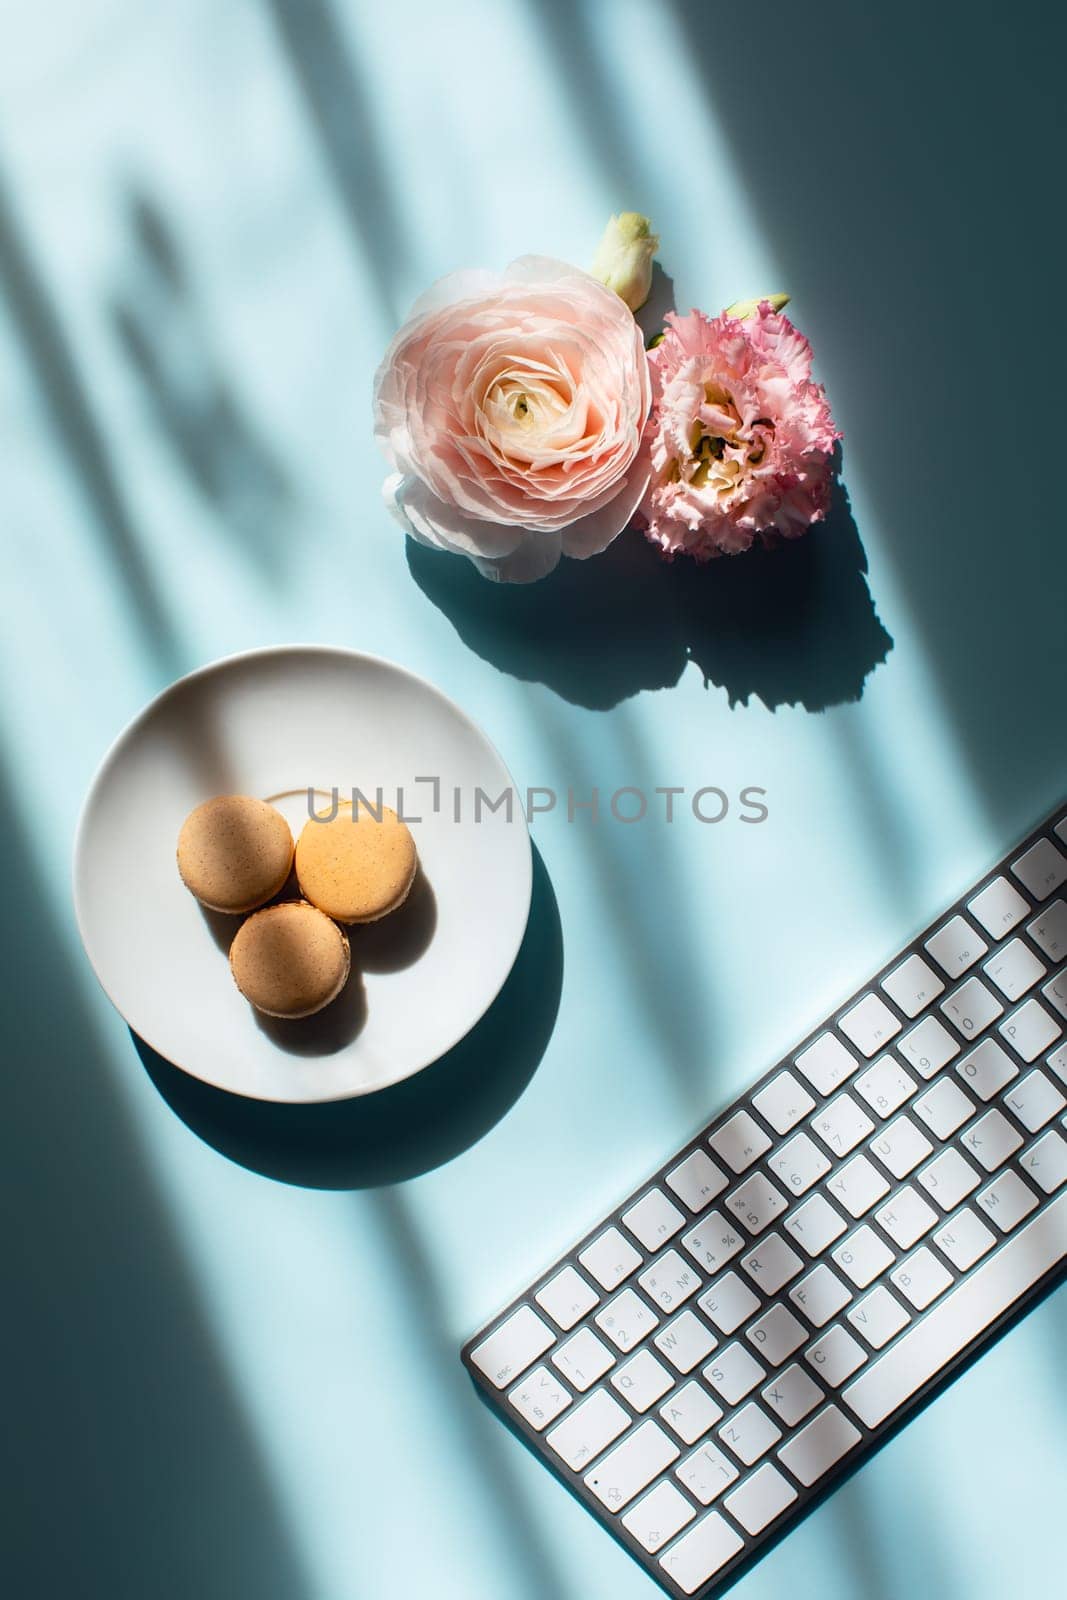 Workplace at home by the window. Flat lat macaroons in sunlight, flowers and keyboard.